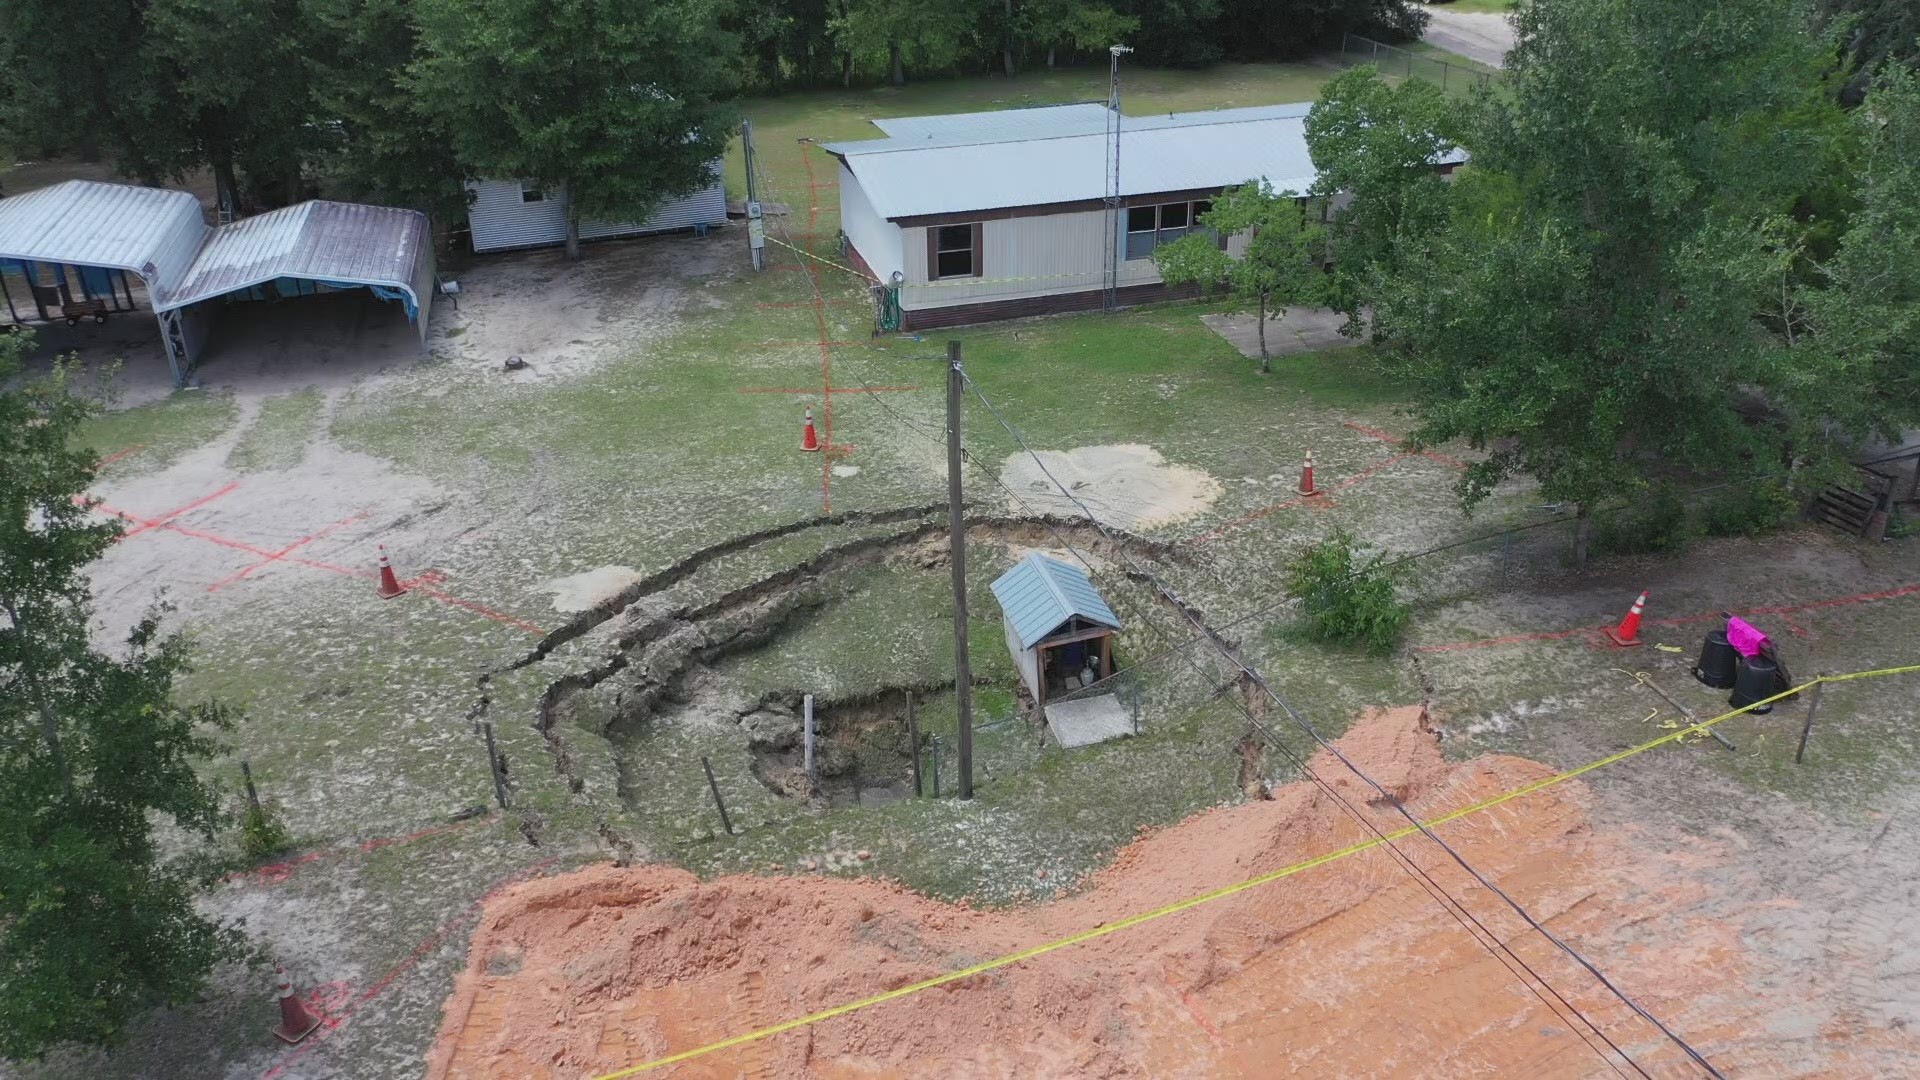 The 60-foot-long sinkhole is said to be expanding and it is located in the area of Auburn Avenue between Princeton and Notre Dame Streets, according to the Clay County Sheriff's Office.